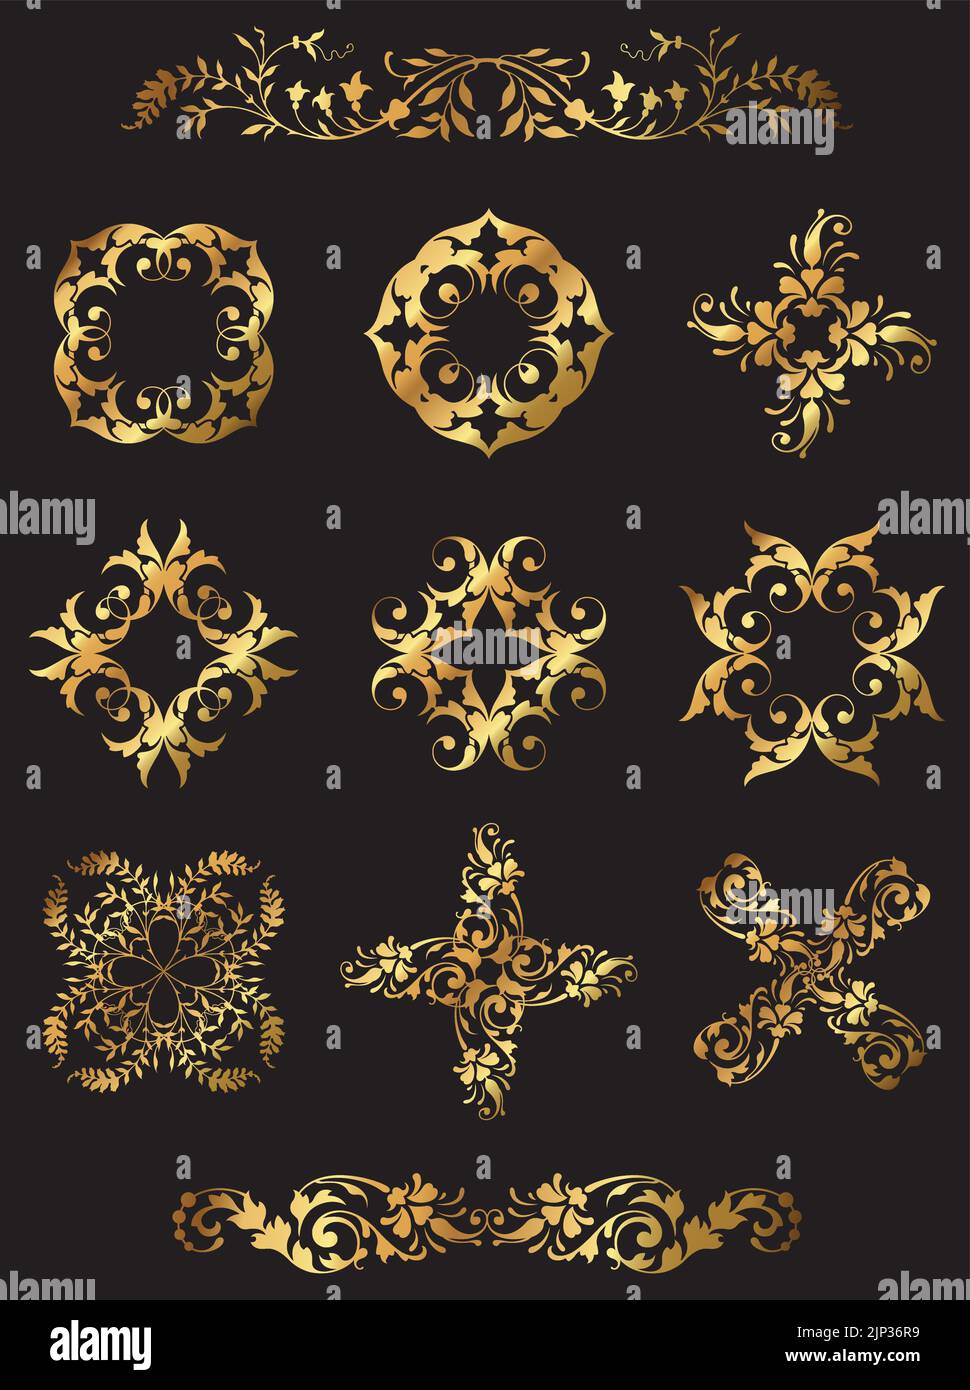 A set of vintage vector gold decorative floral icons. Stock Vector